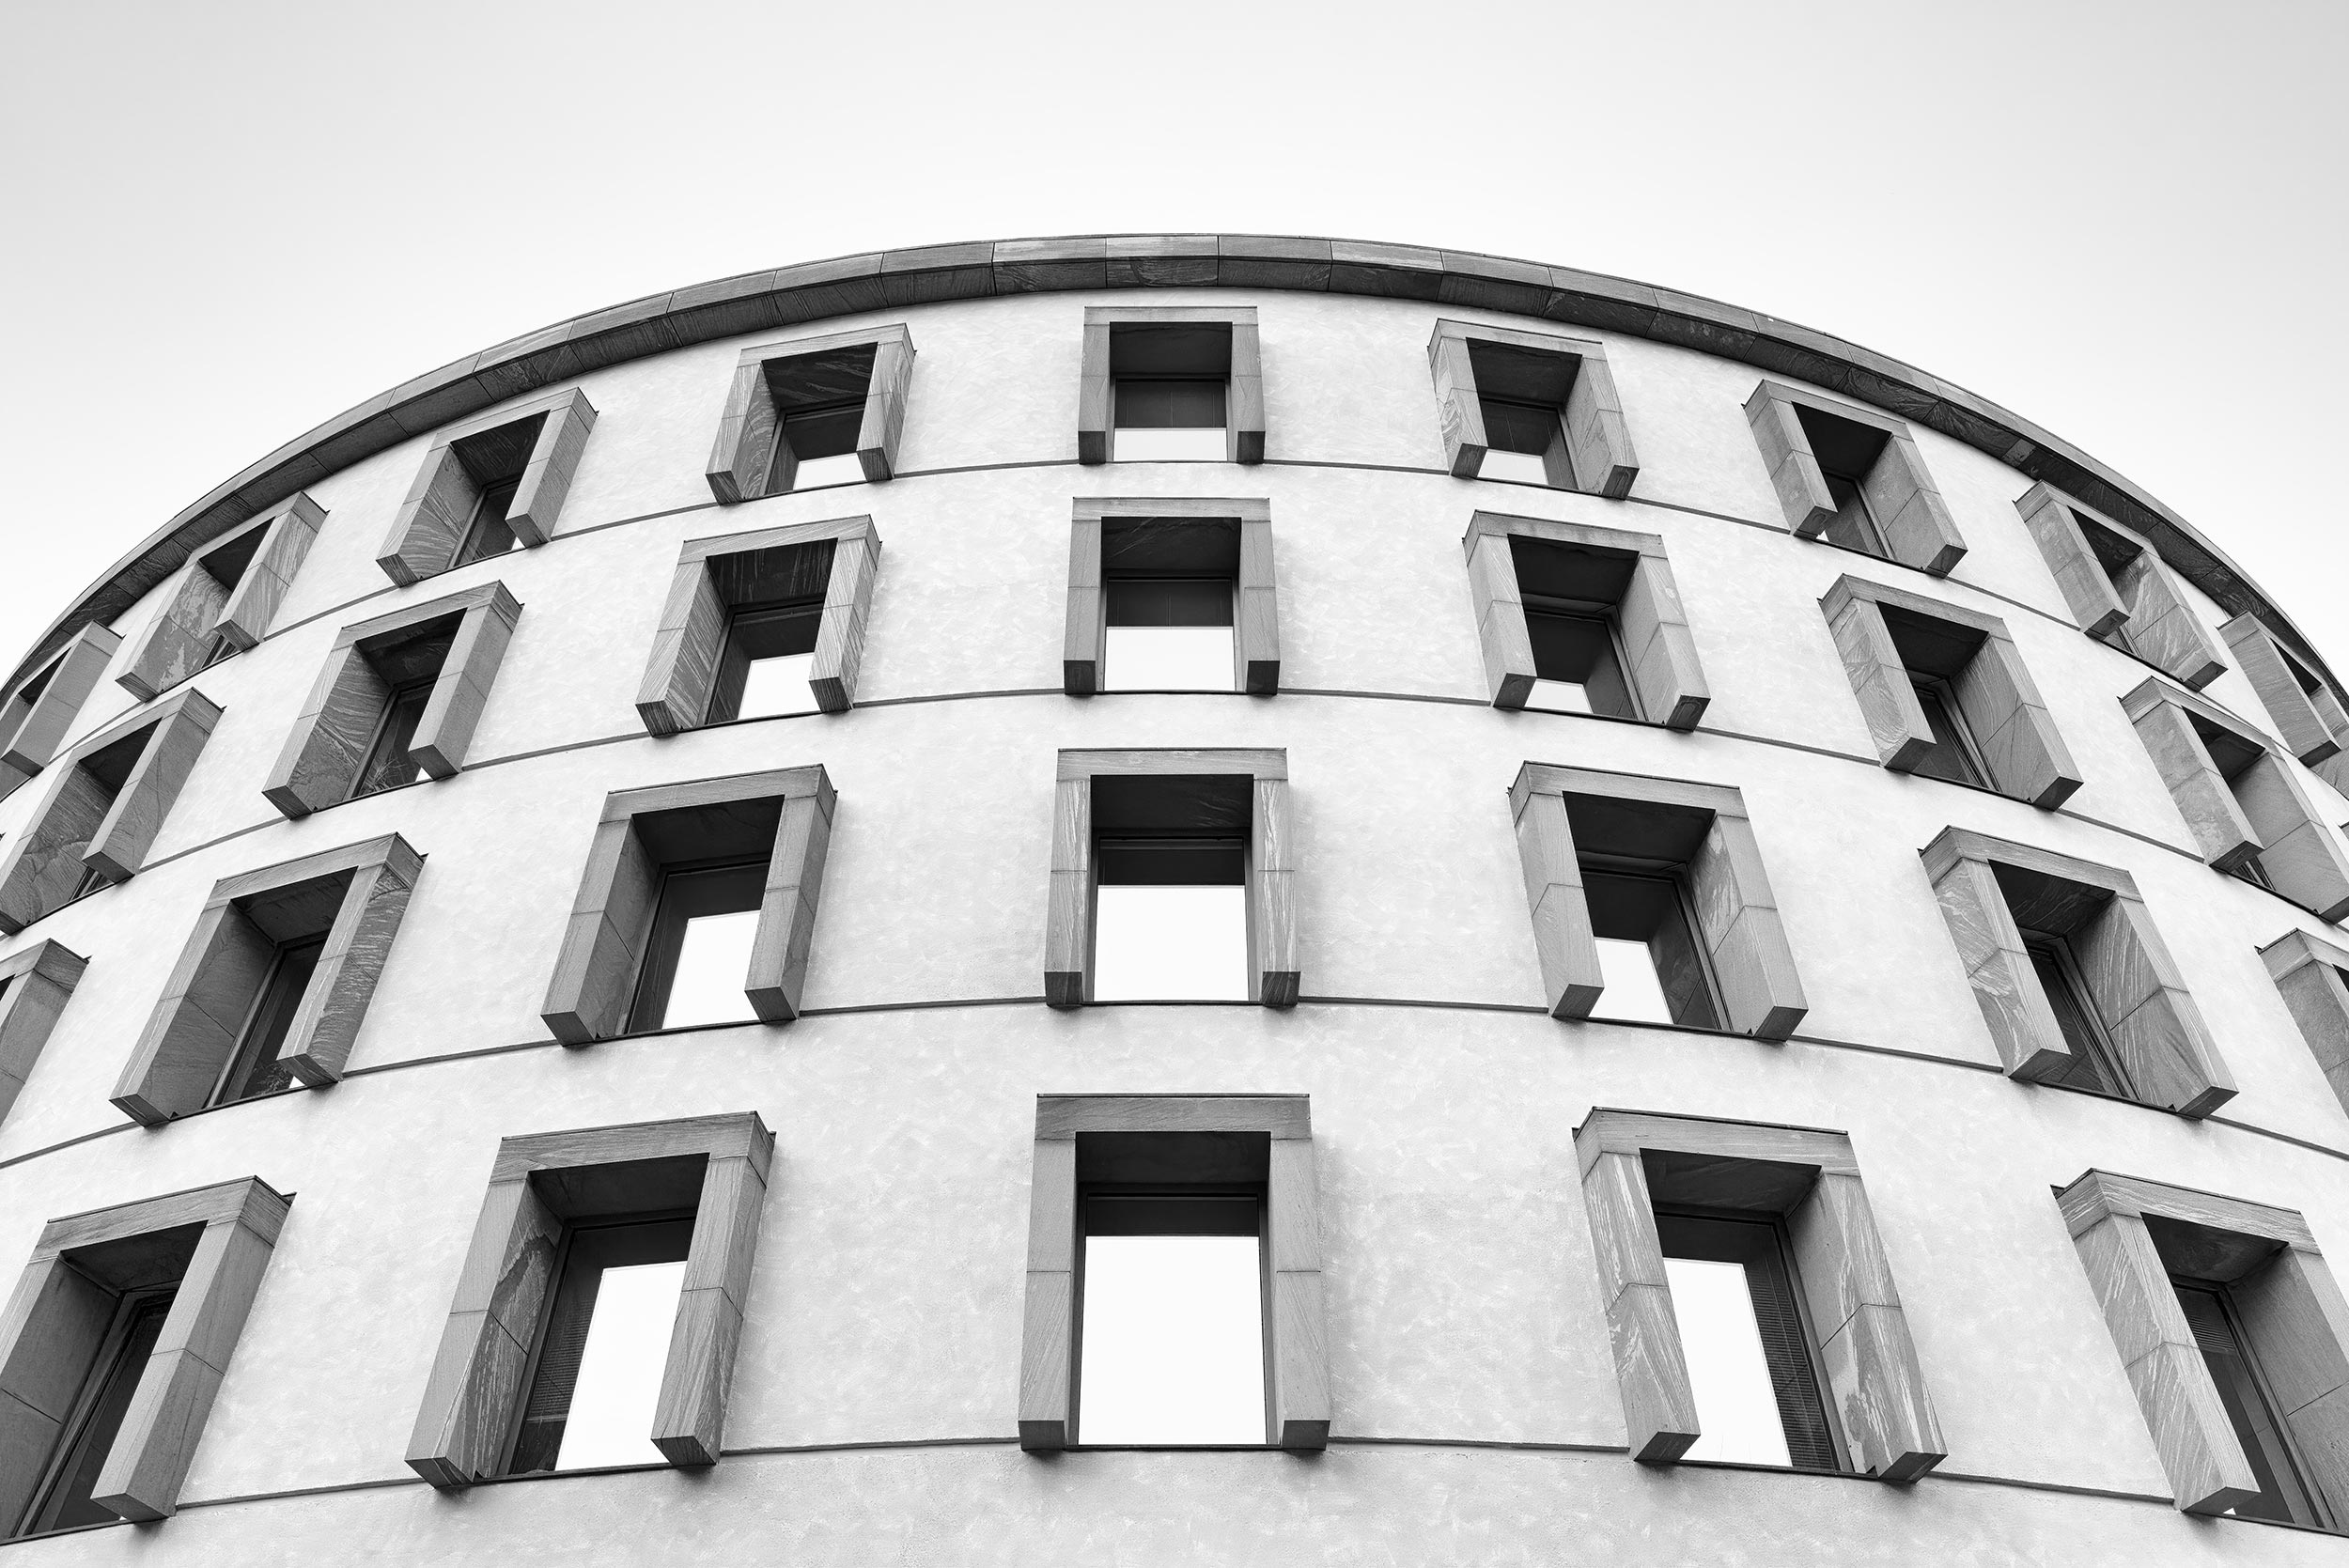 Social Science Research Center Berlin (WZB),Berlin - James Stirling, Michael Wilford & Associates - Black & White Fine Art Architecture Photography